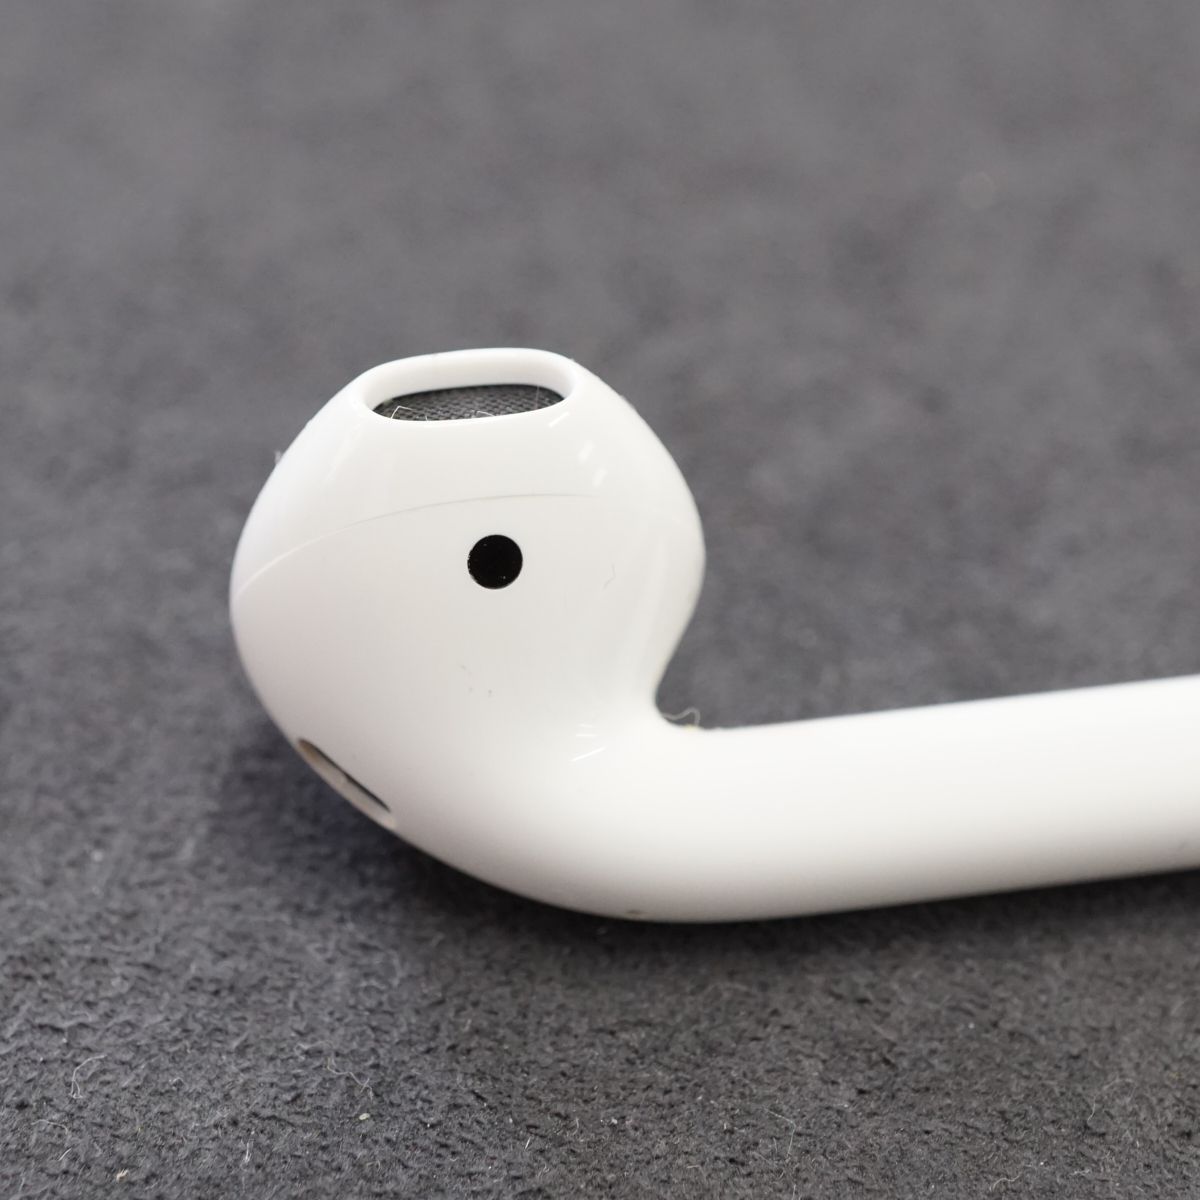 Apple AirPods air pozUSED beautiful goods right earphone only R one-side ear A2032 second generation regular goods MV7N2J/A working properly goods used T V9171